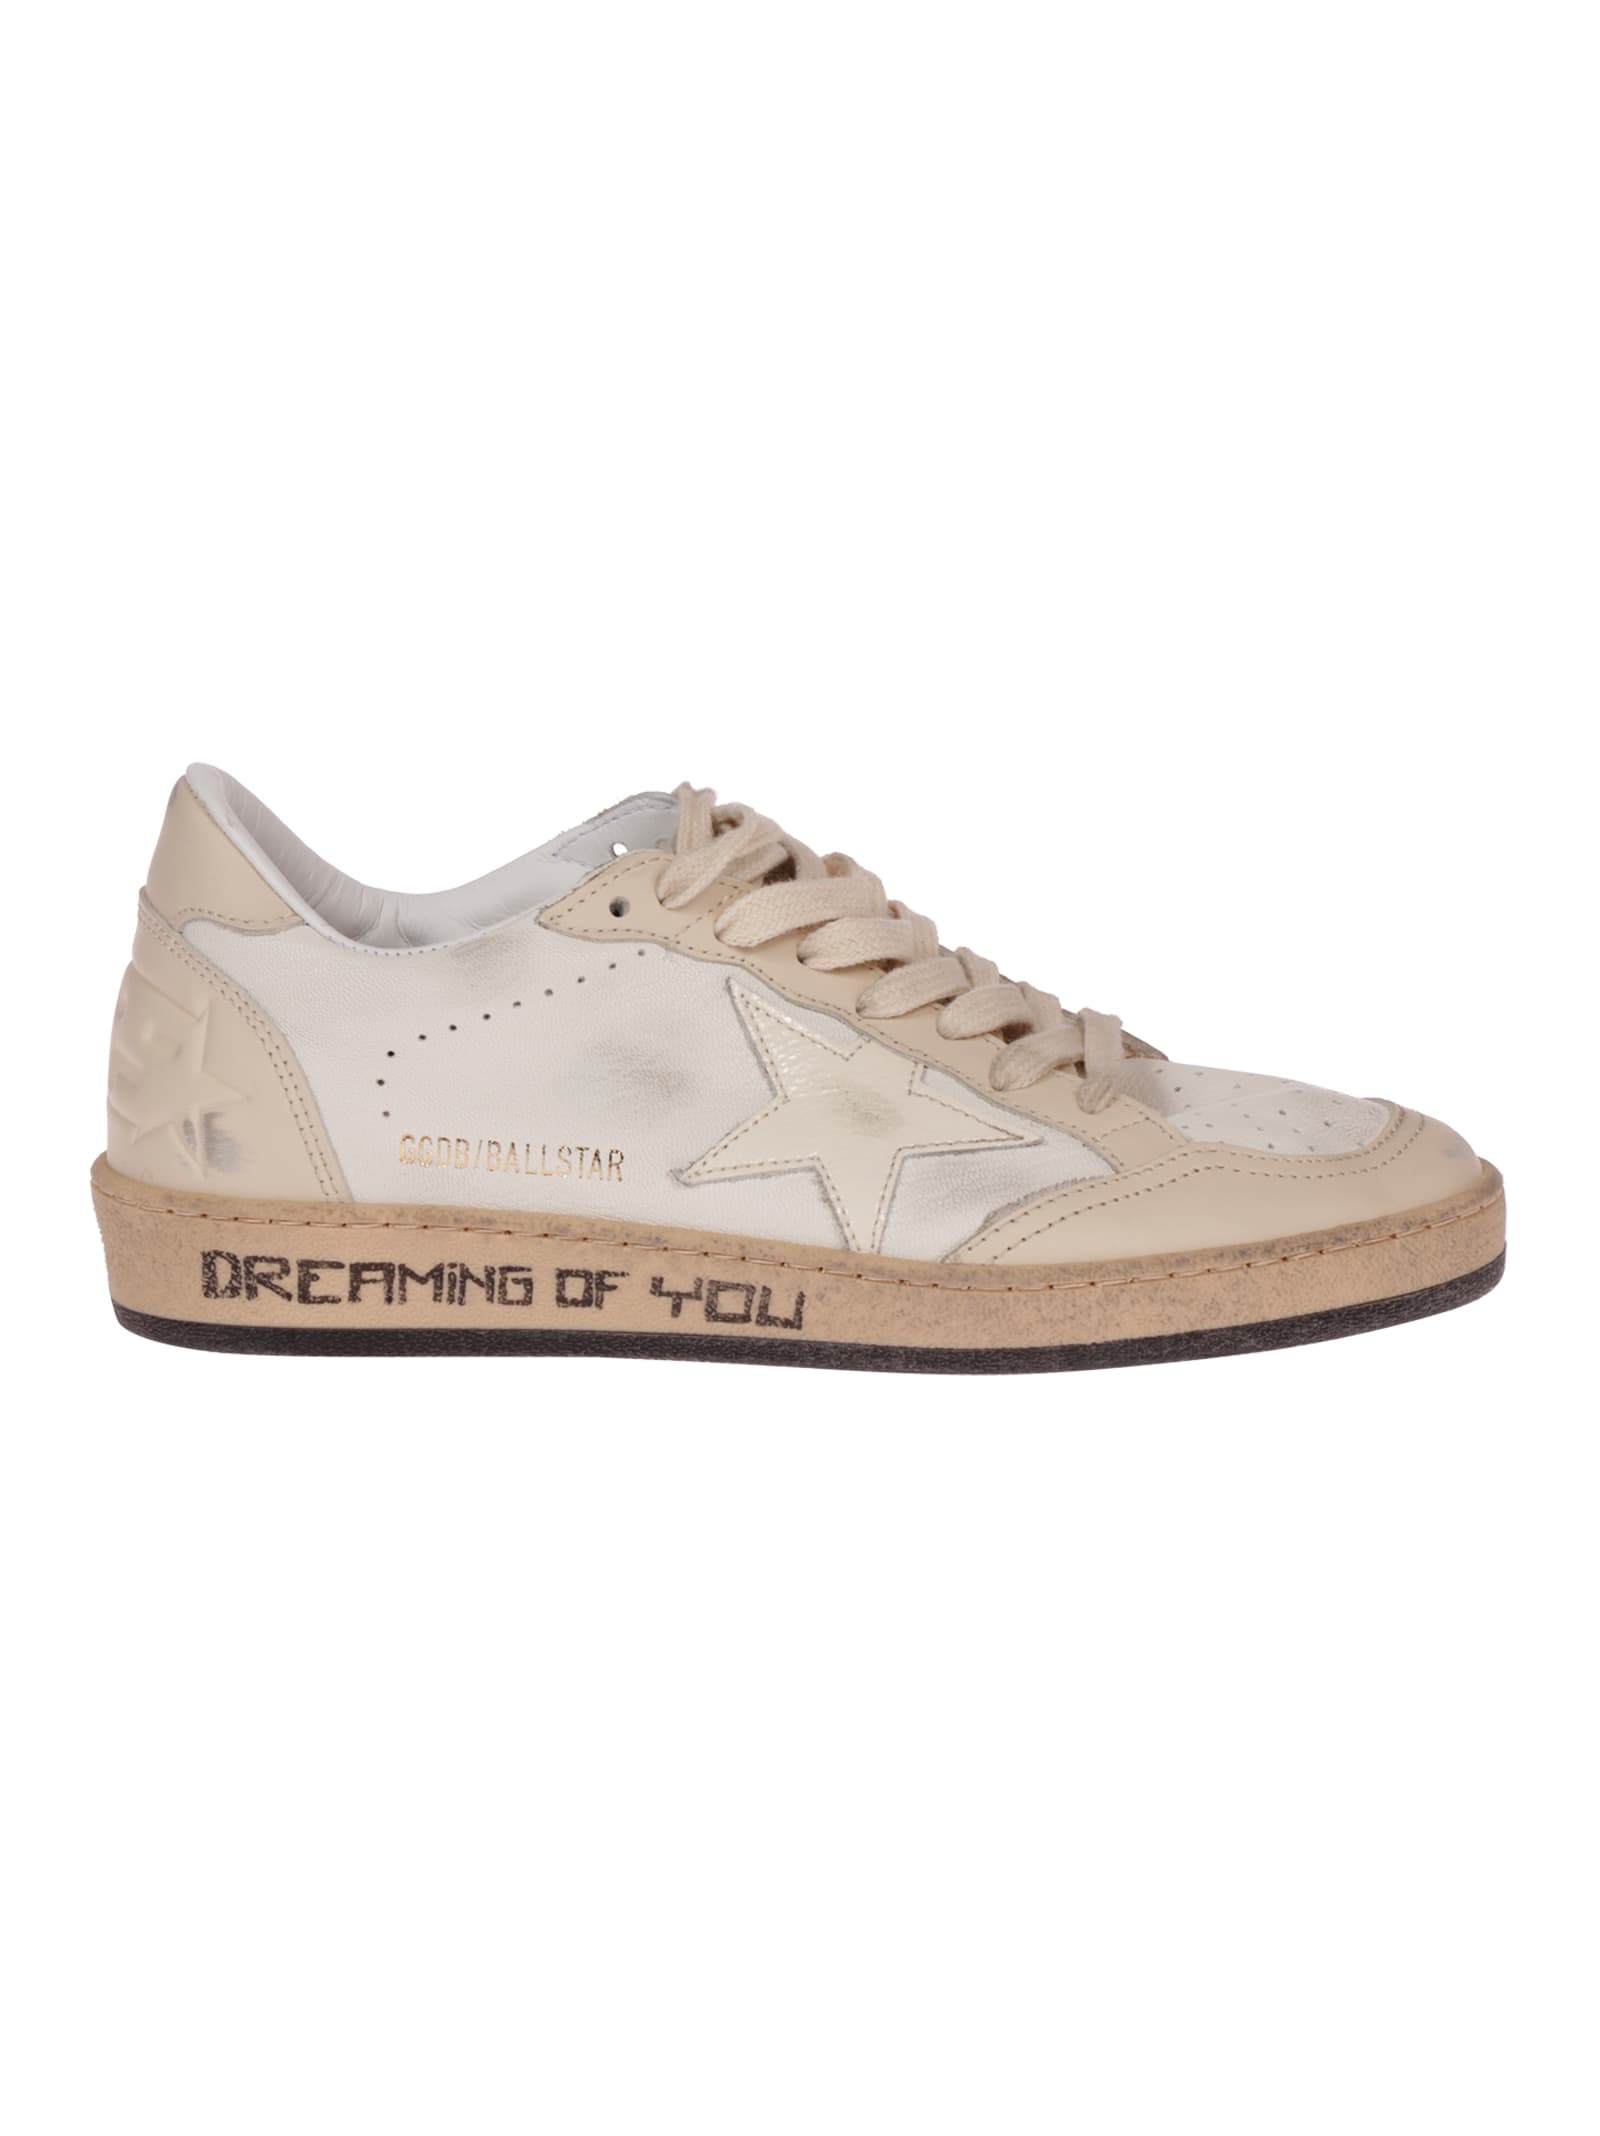 Golden Goose Ball Star Nappa Leather Toe Star